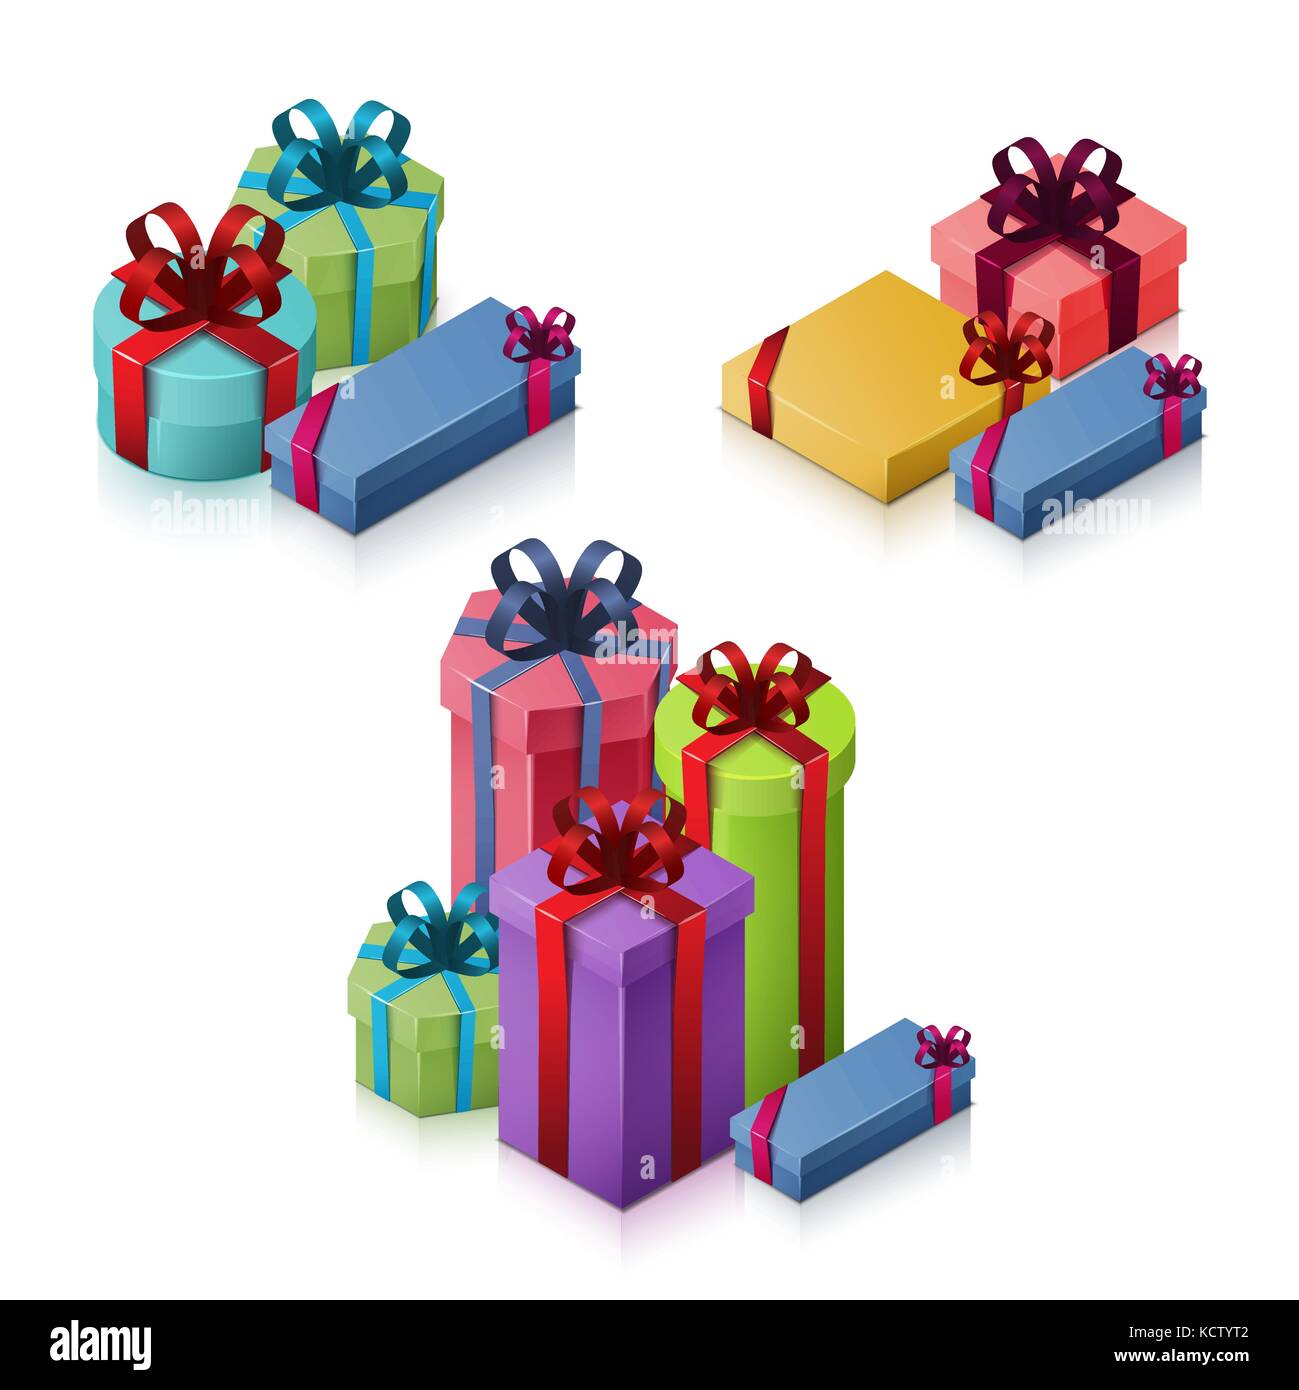 Set of gift boxes with bows and ribbons. Isometric illustration  Stock Vector